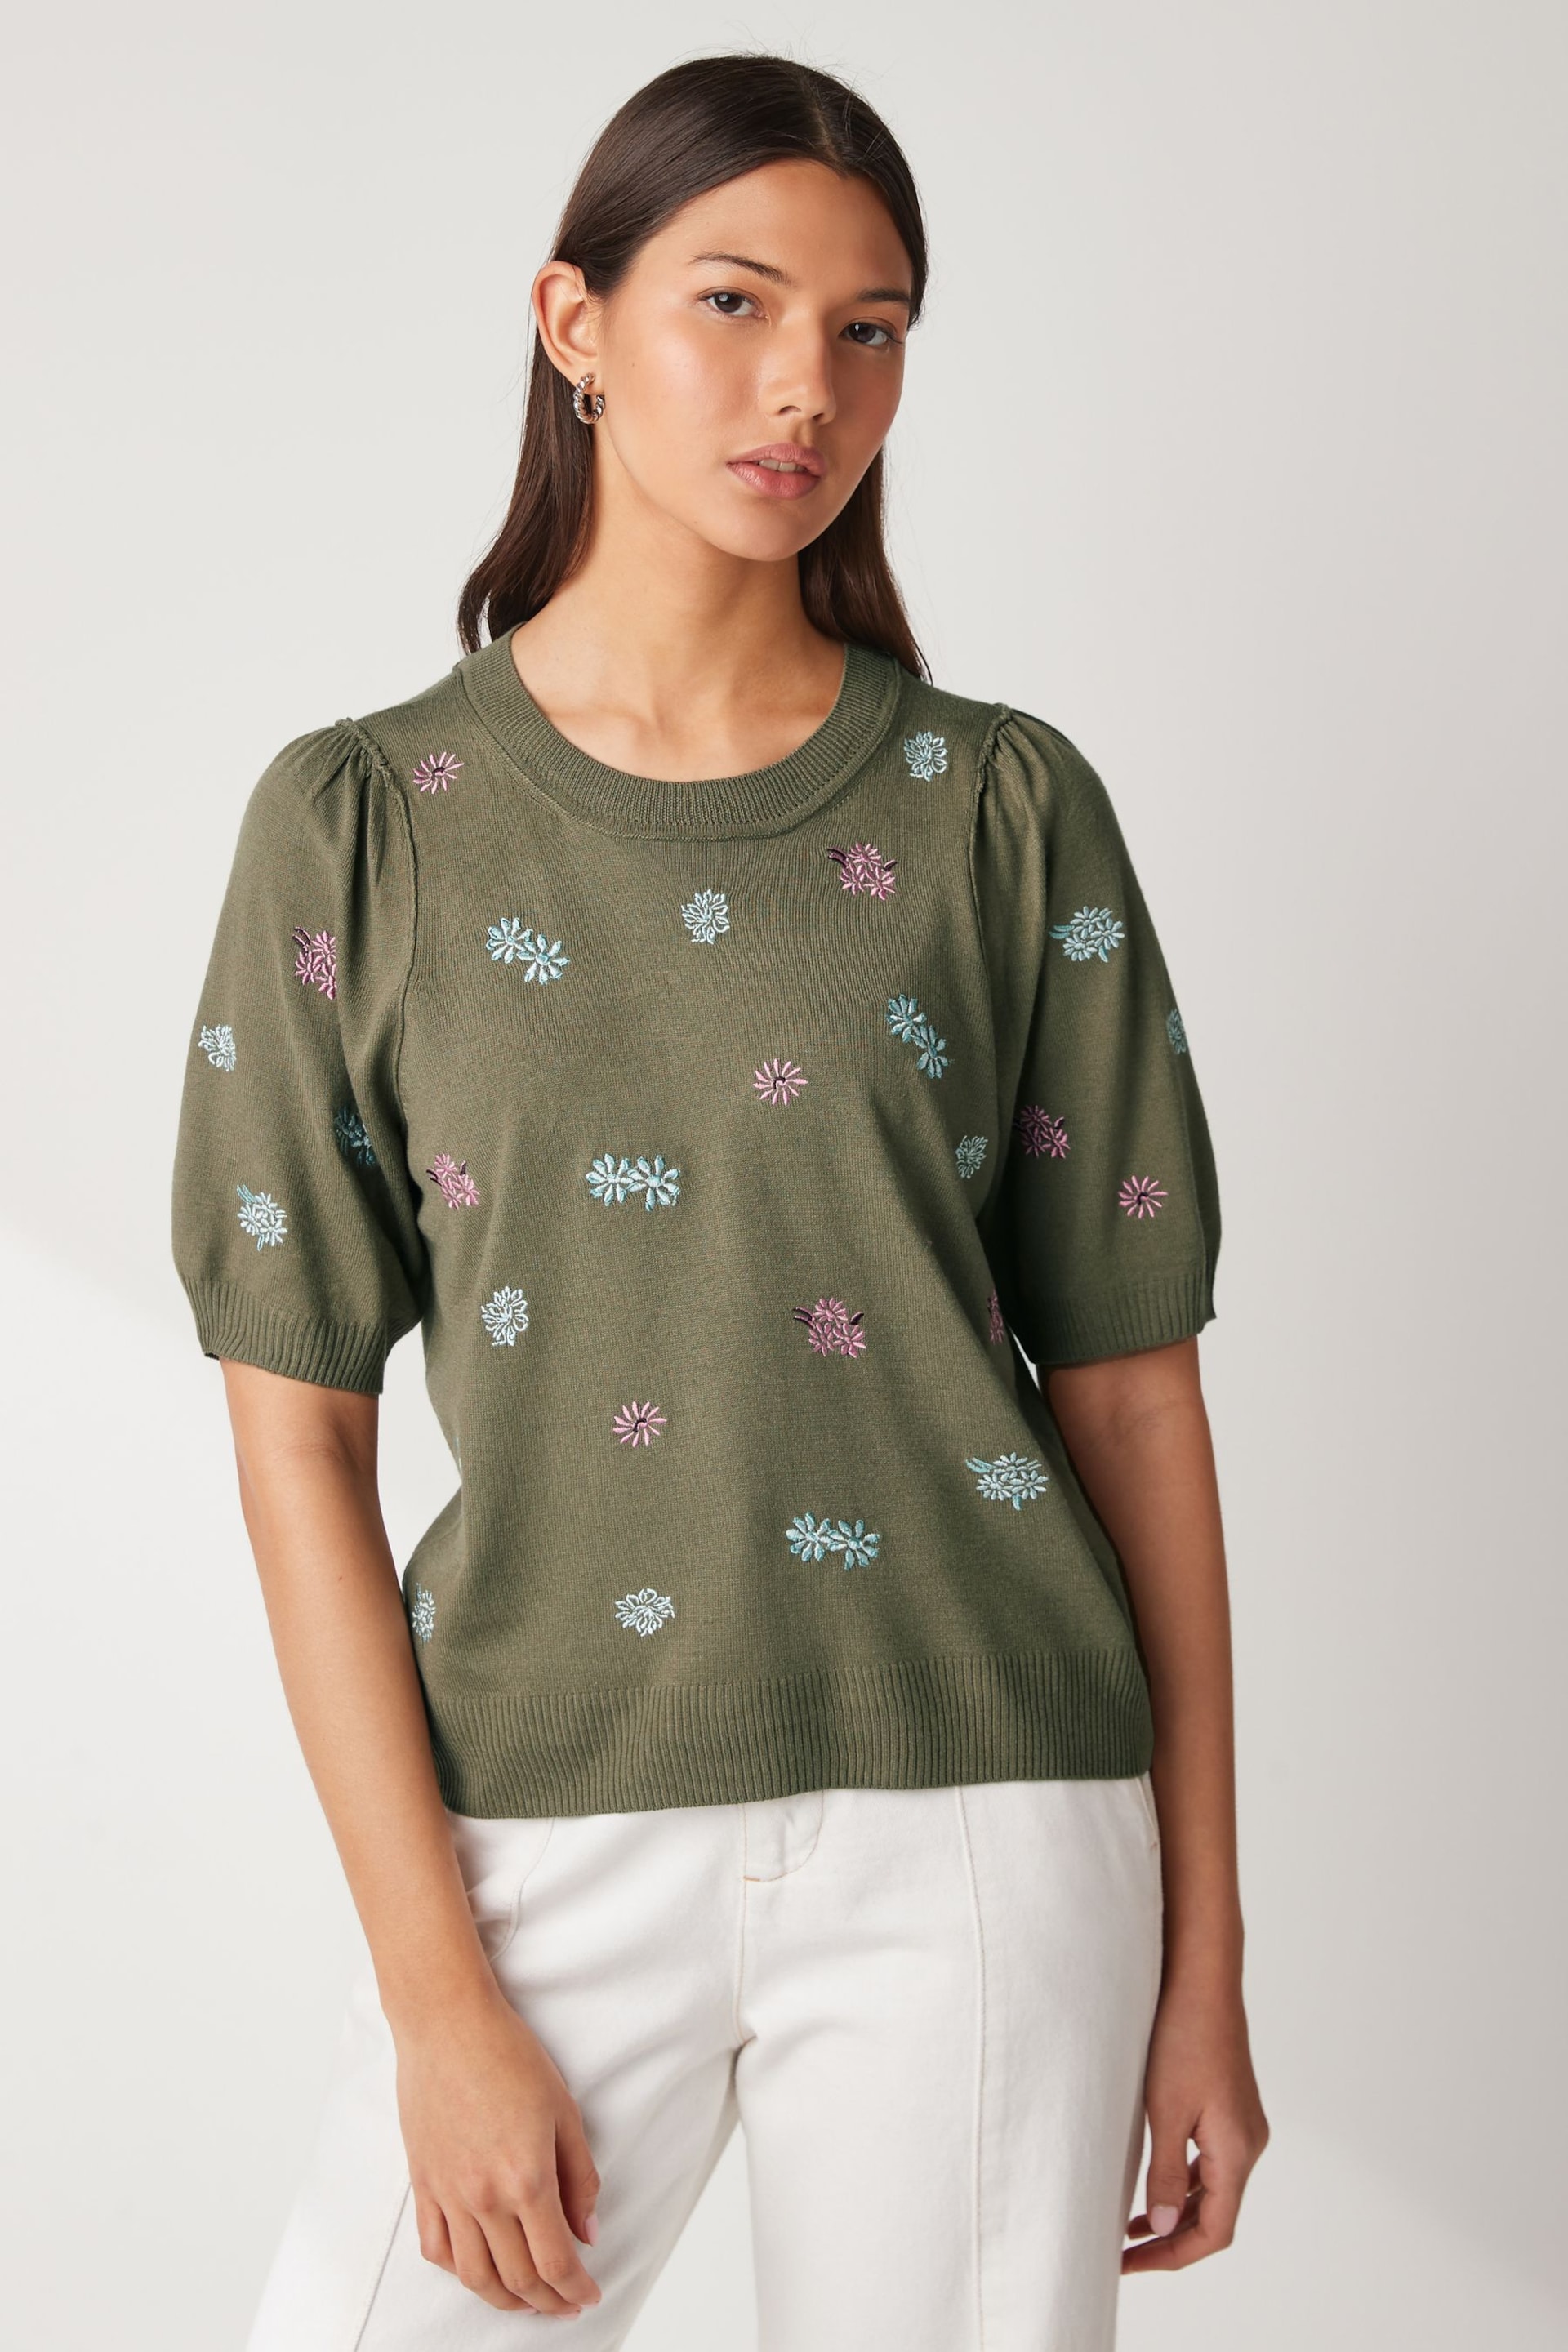 Khaki Green Floral Embroidery Crew Neck Short Sleeve Knitted Top - Image 1 of 5